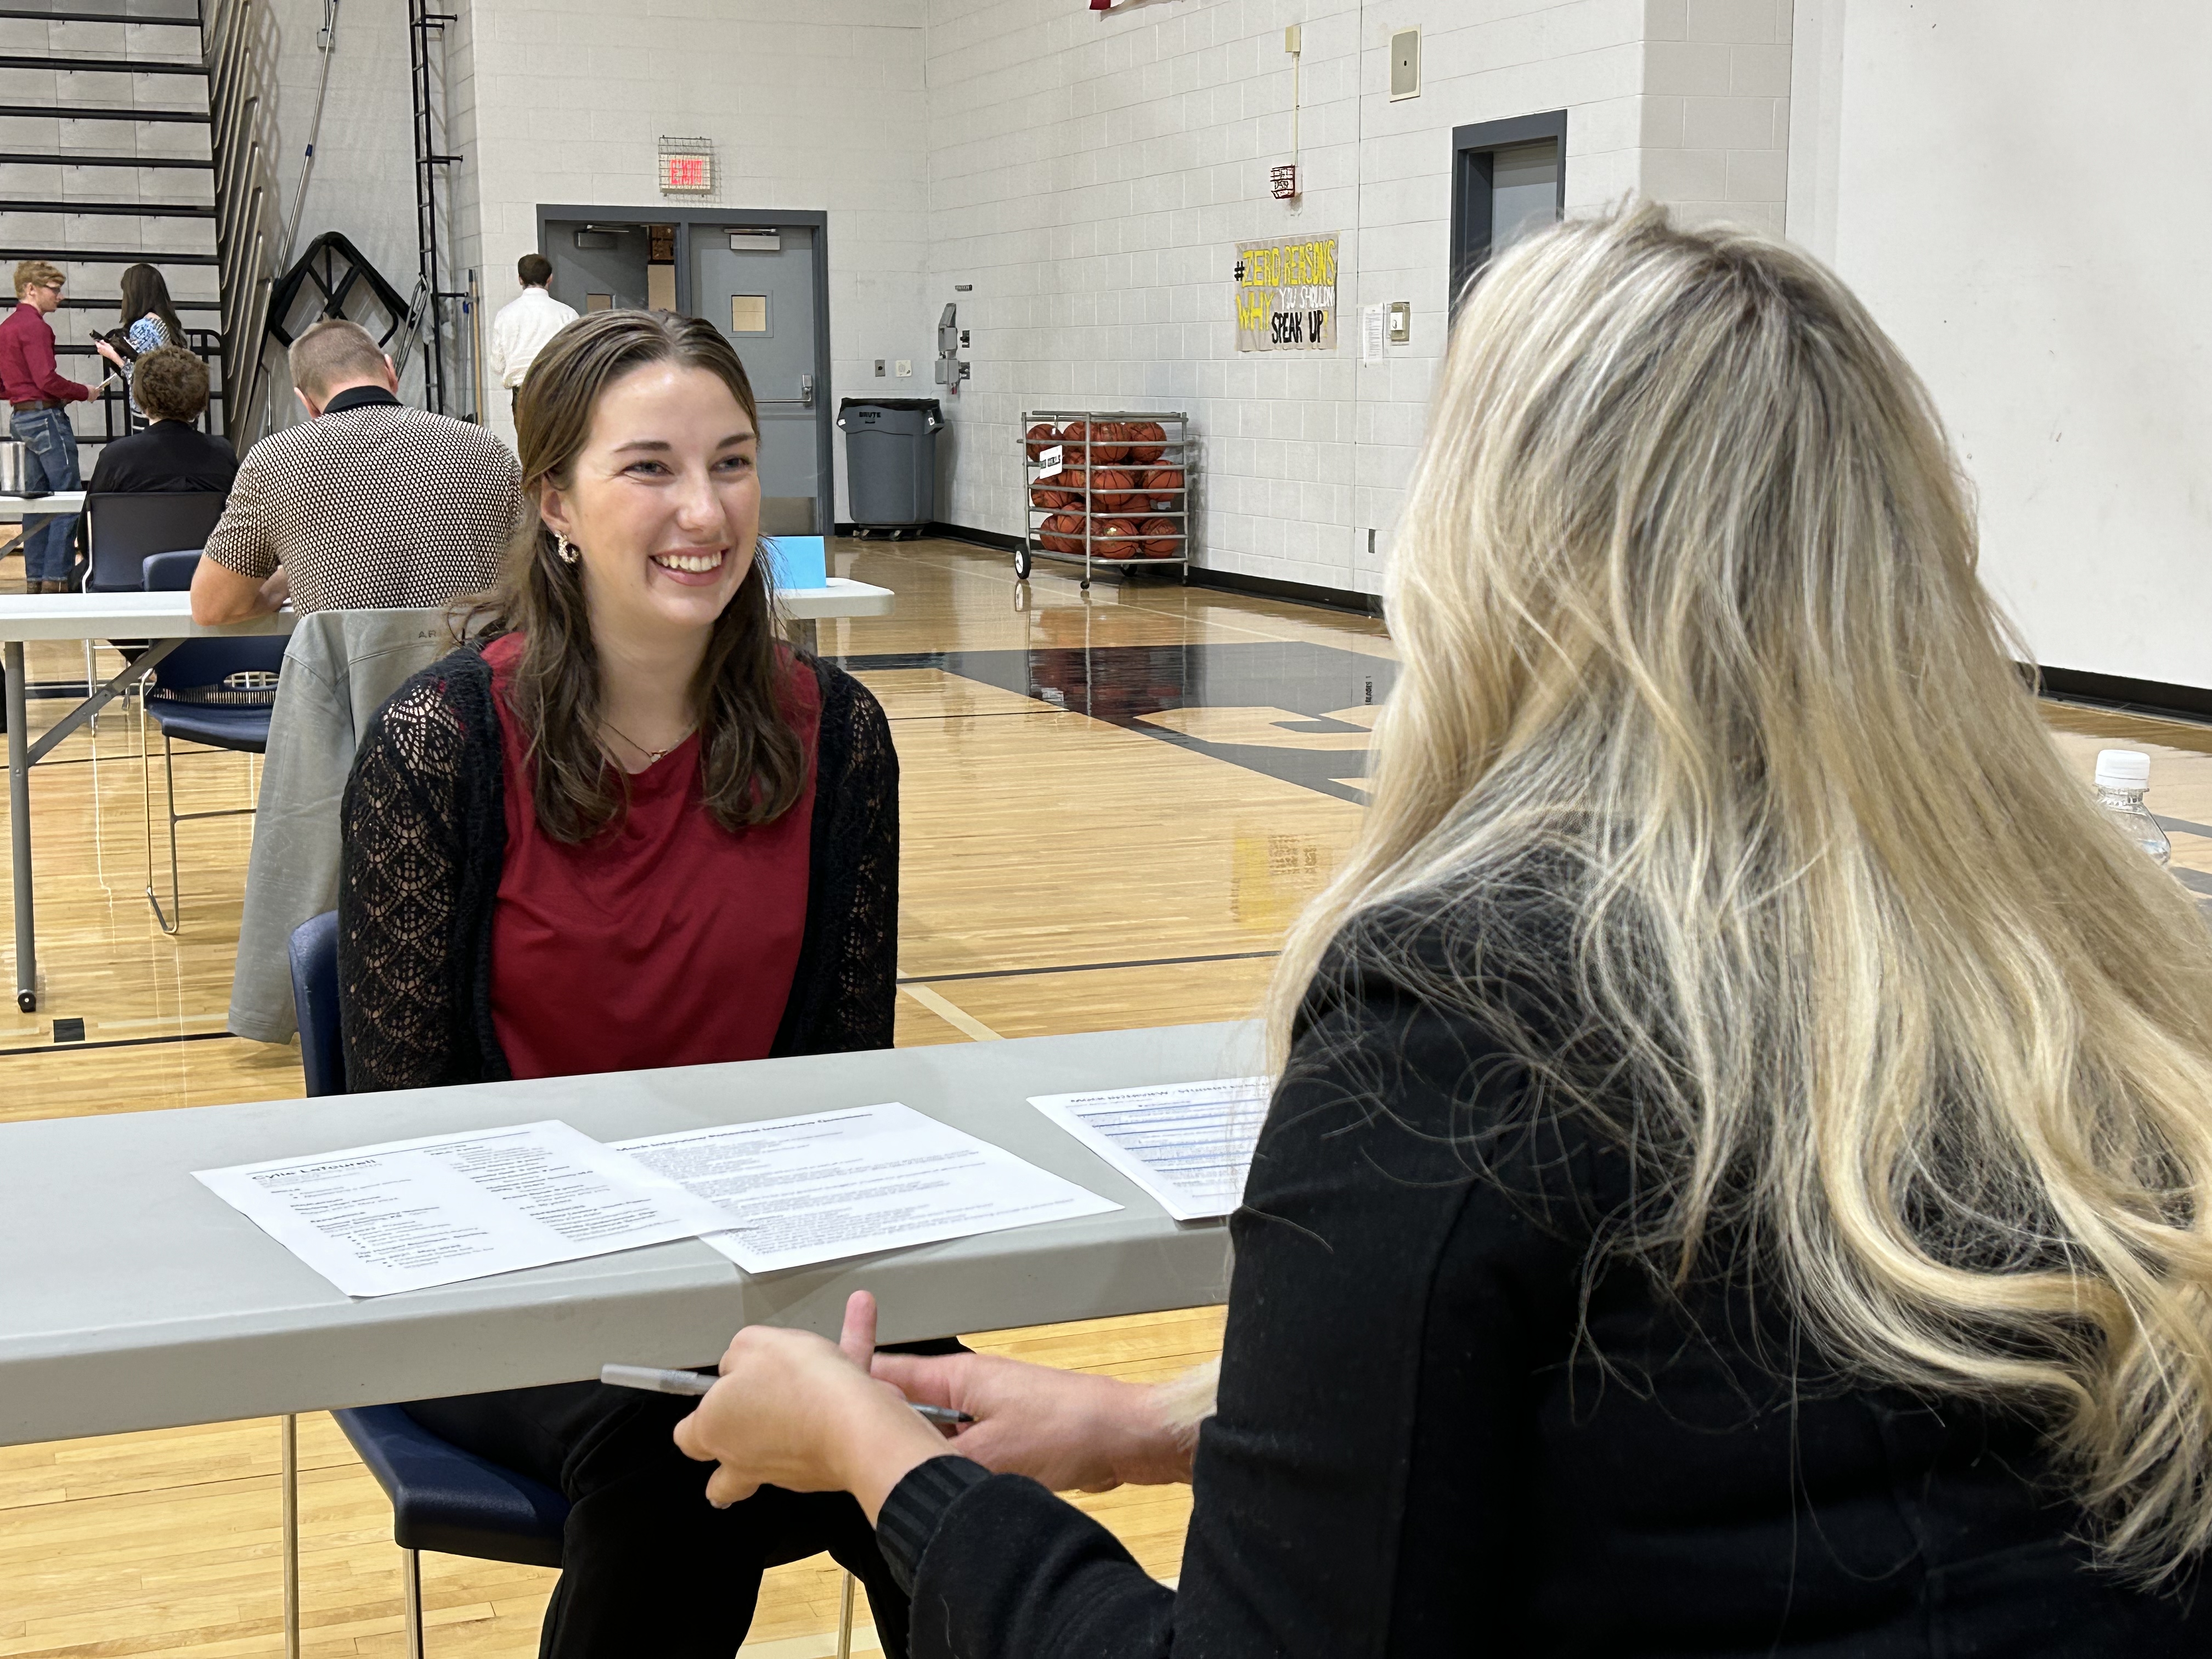 SHS Senior interviews with a community volunteer during Mock Interview Day